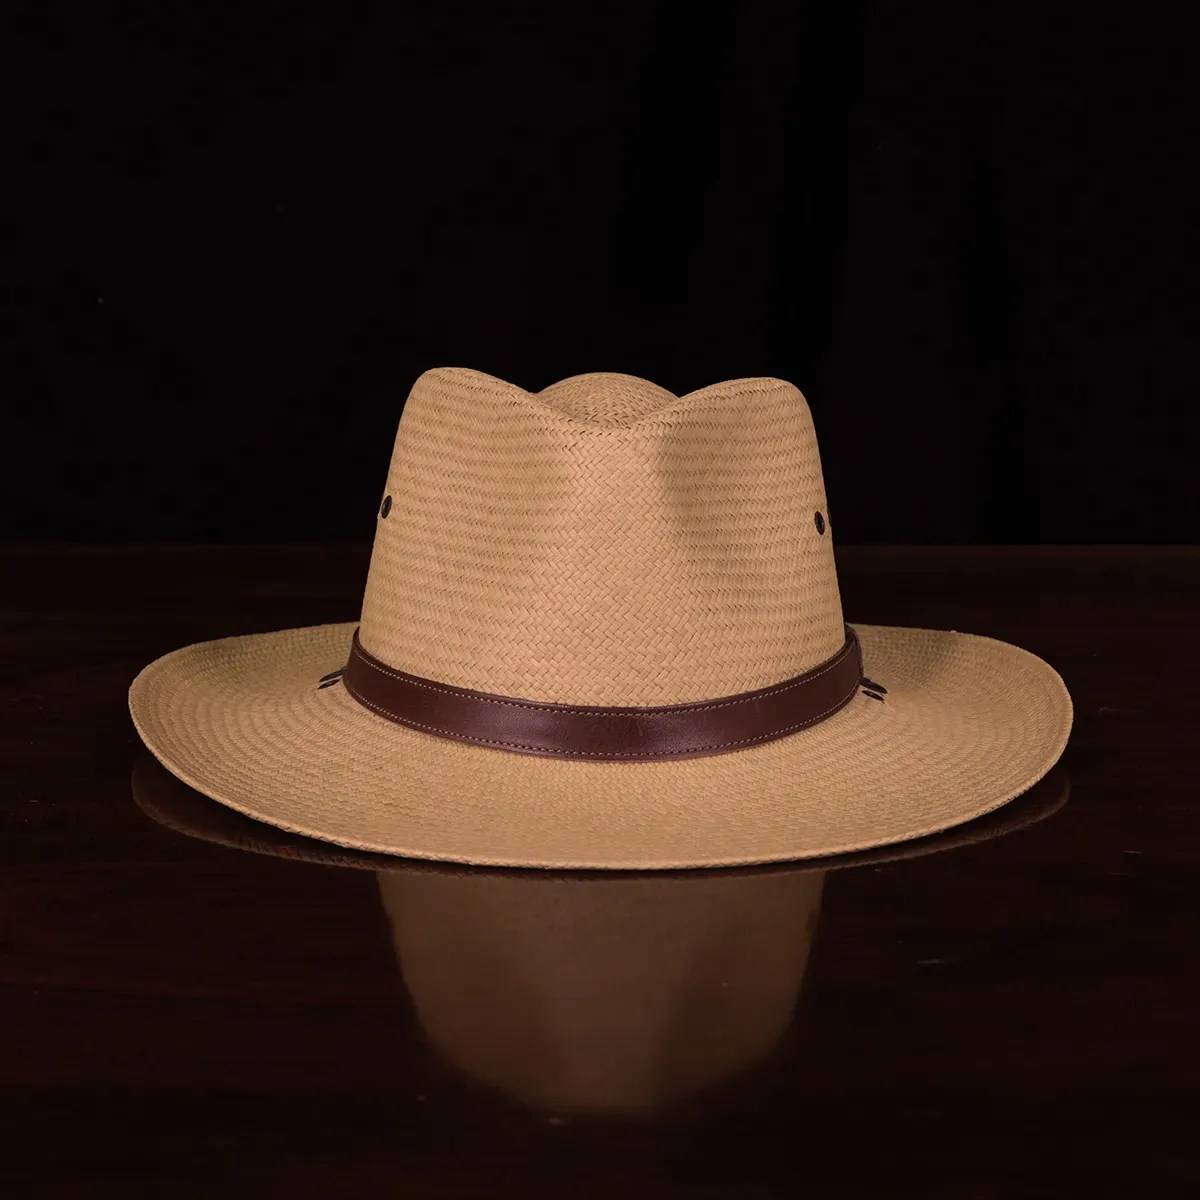 No. 2 Lynnville Panama Hat in the color Khaki showing the front